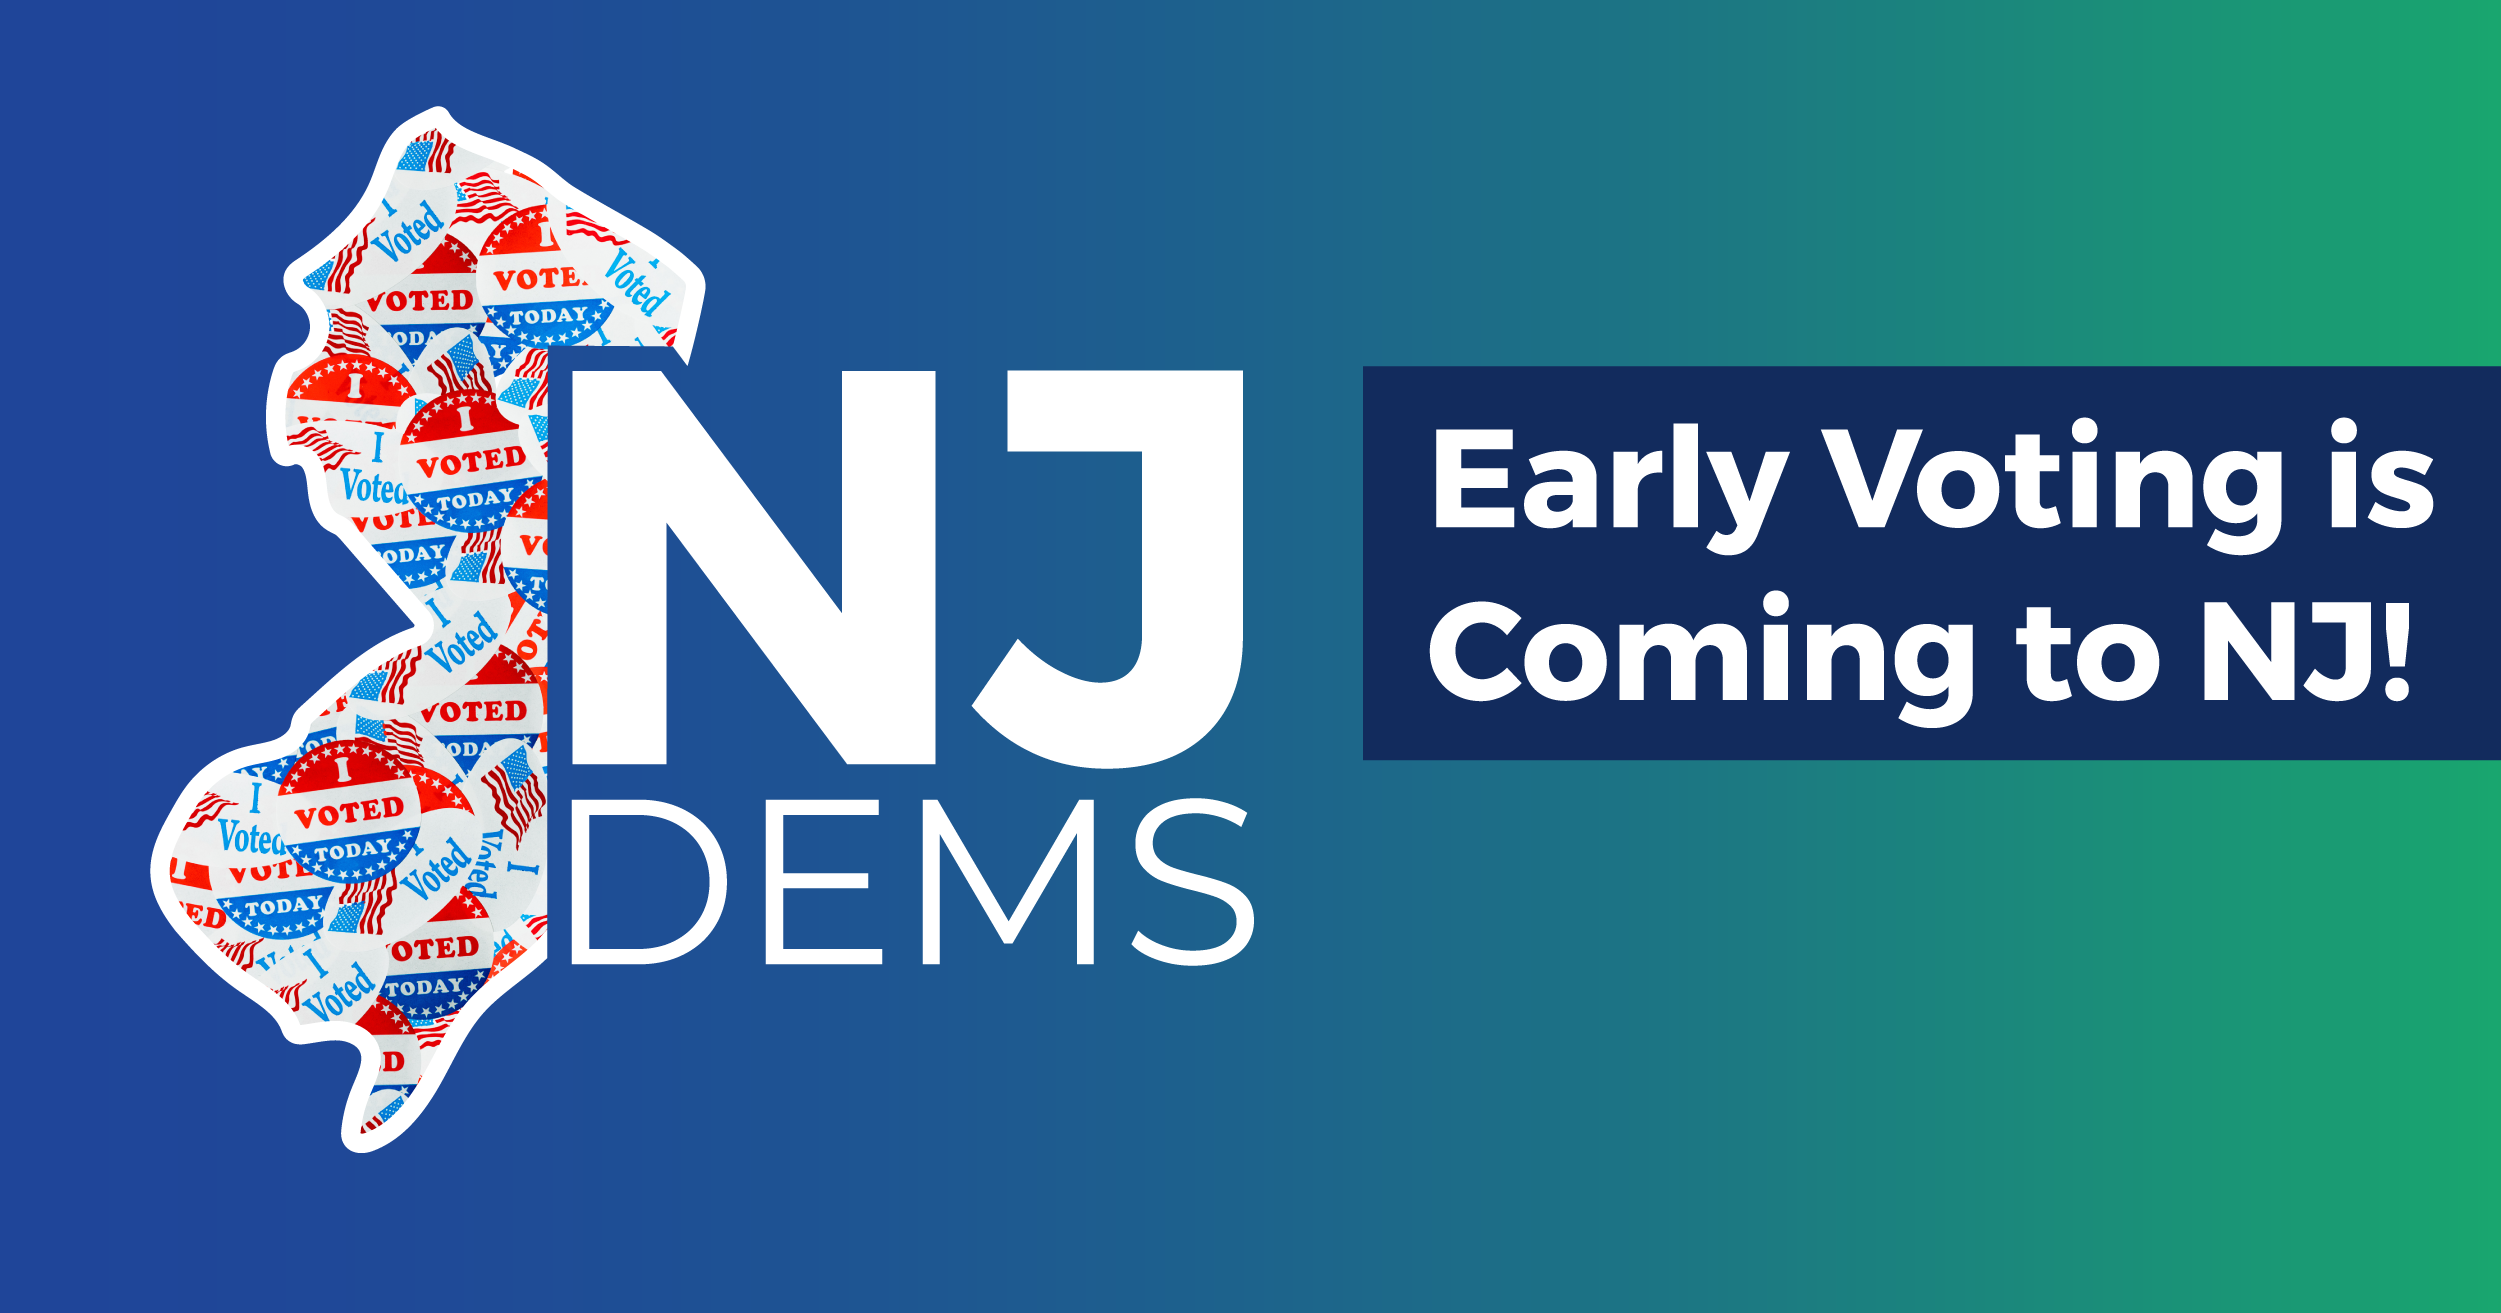 Early Voting is Coming to NJ! Here’s What it Means for Our Elections NJ Dems